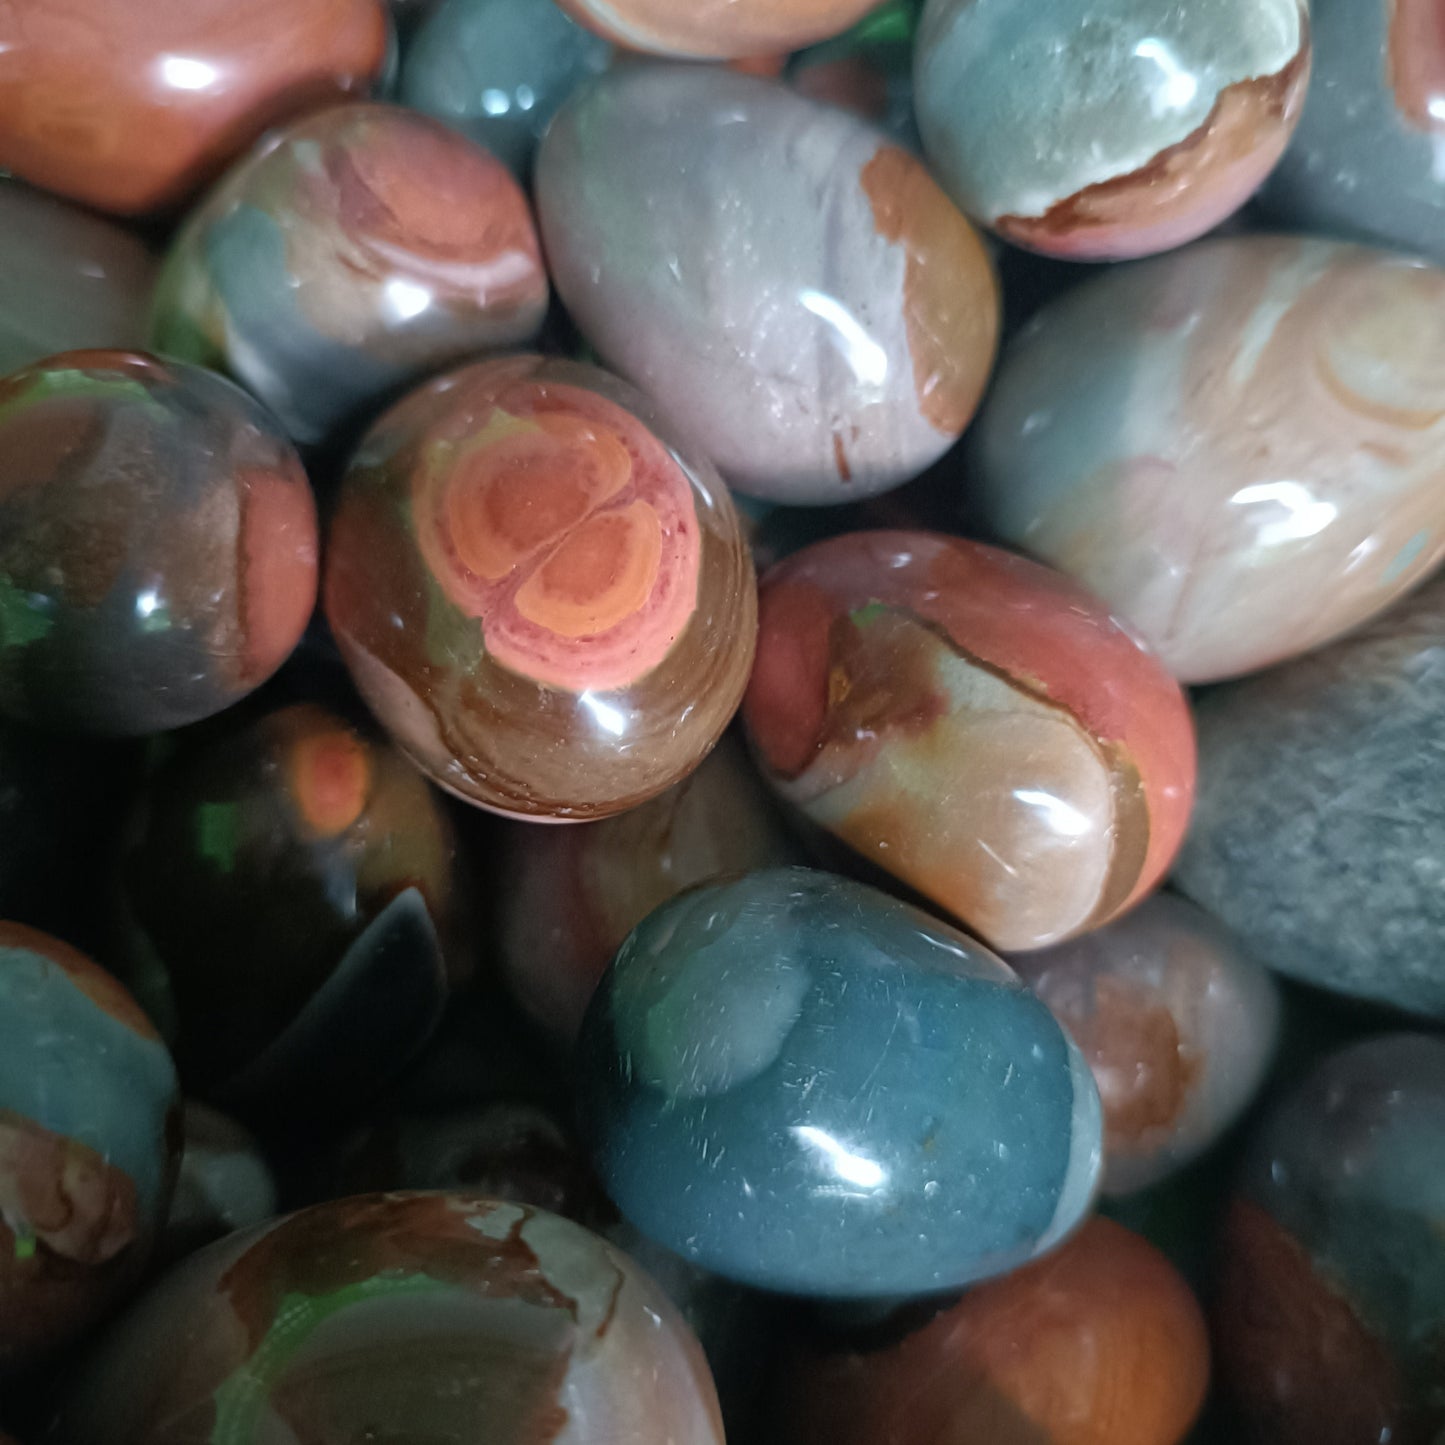 Buy 3 Pieces of Flower Agate Star Get 9 Extra Taking-No.2